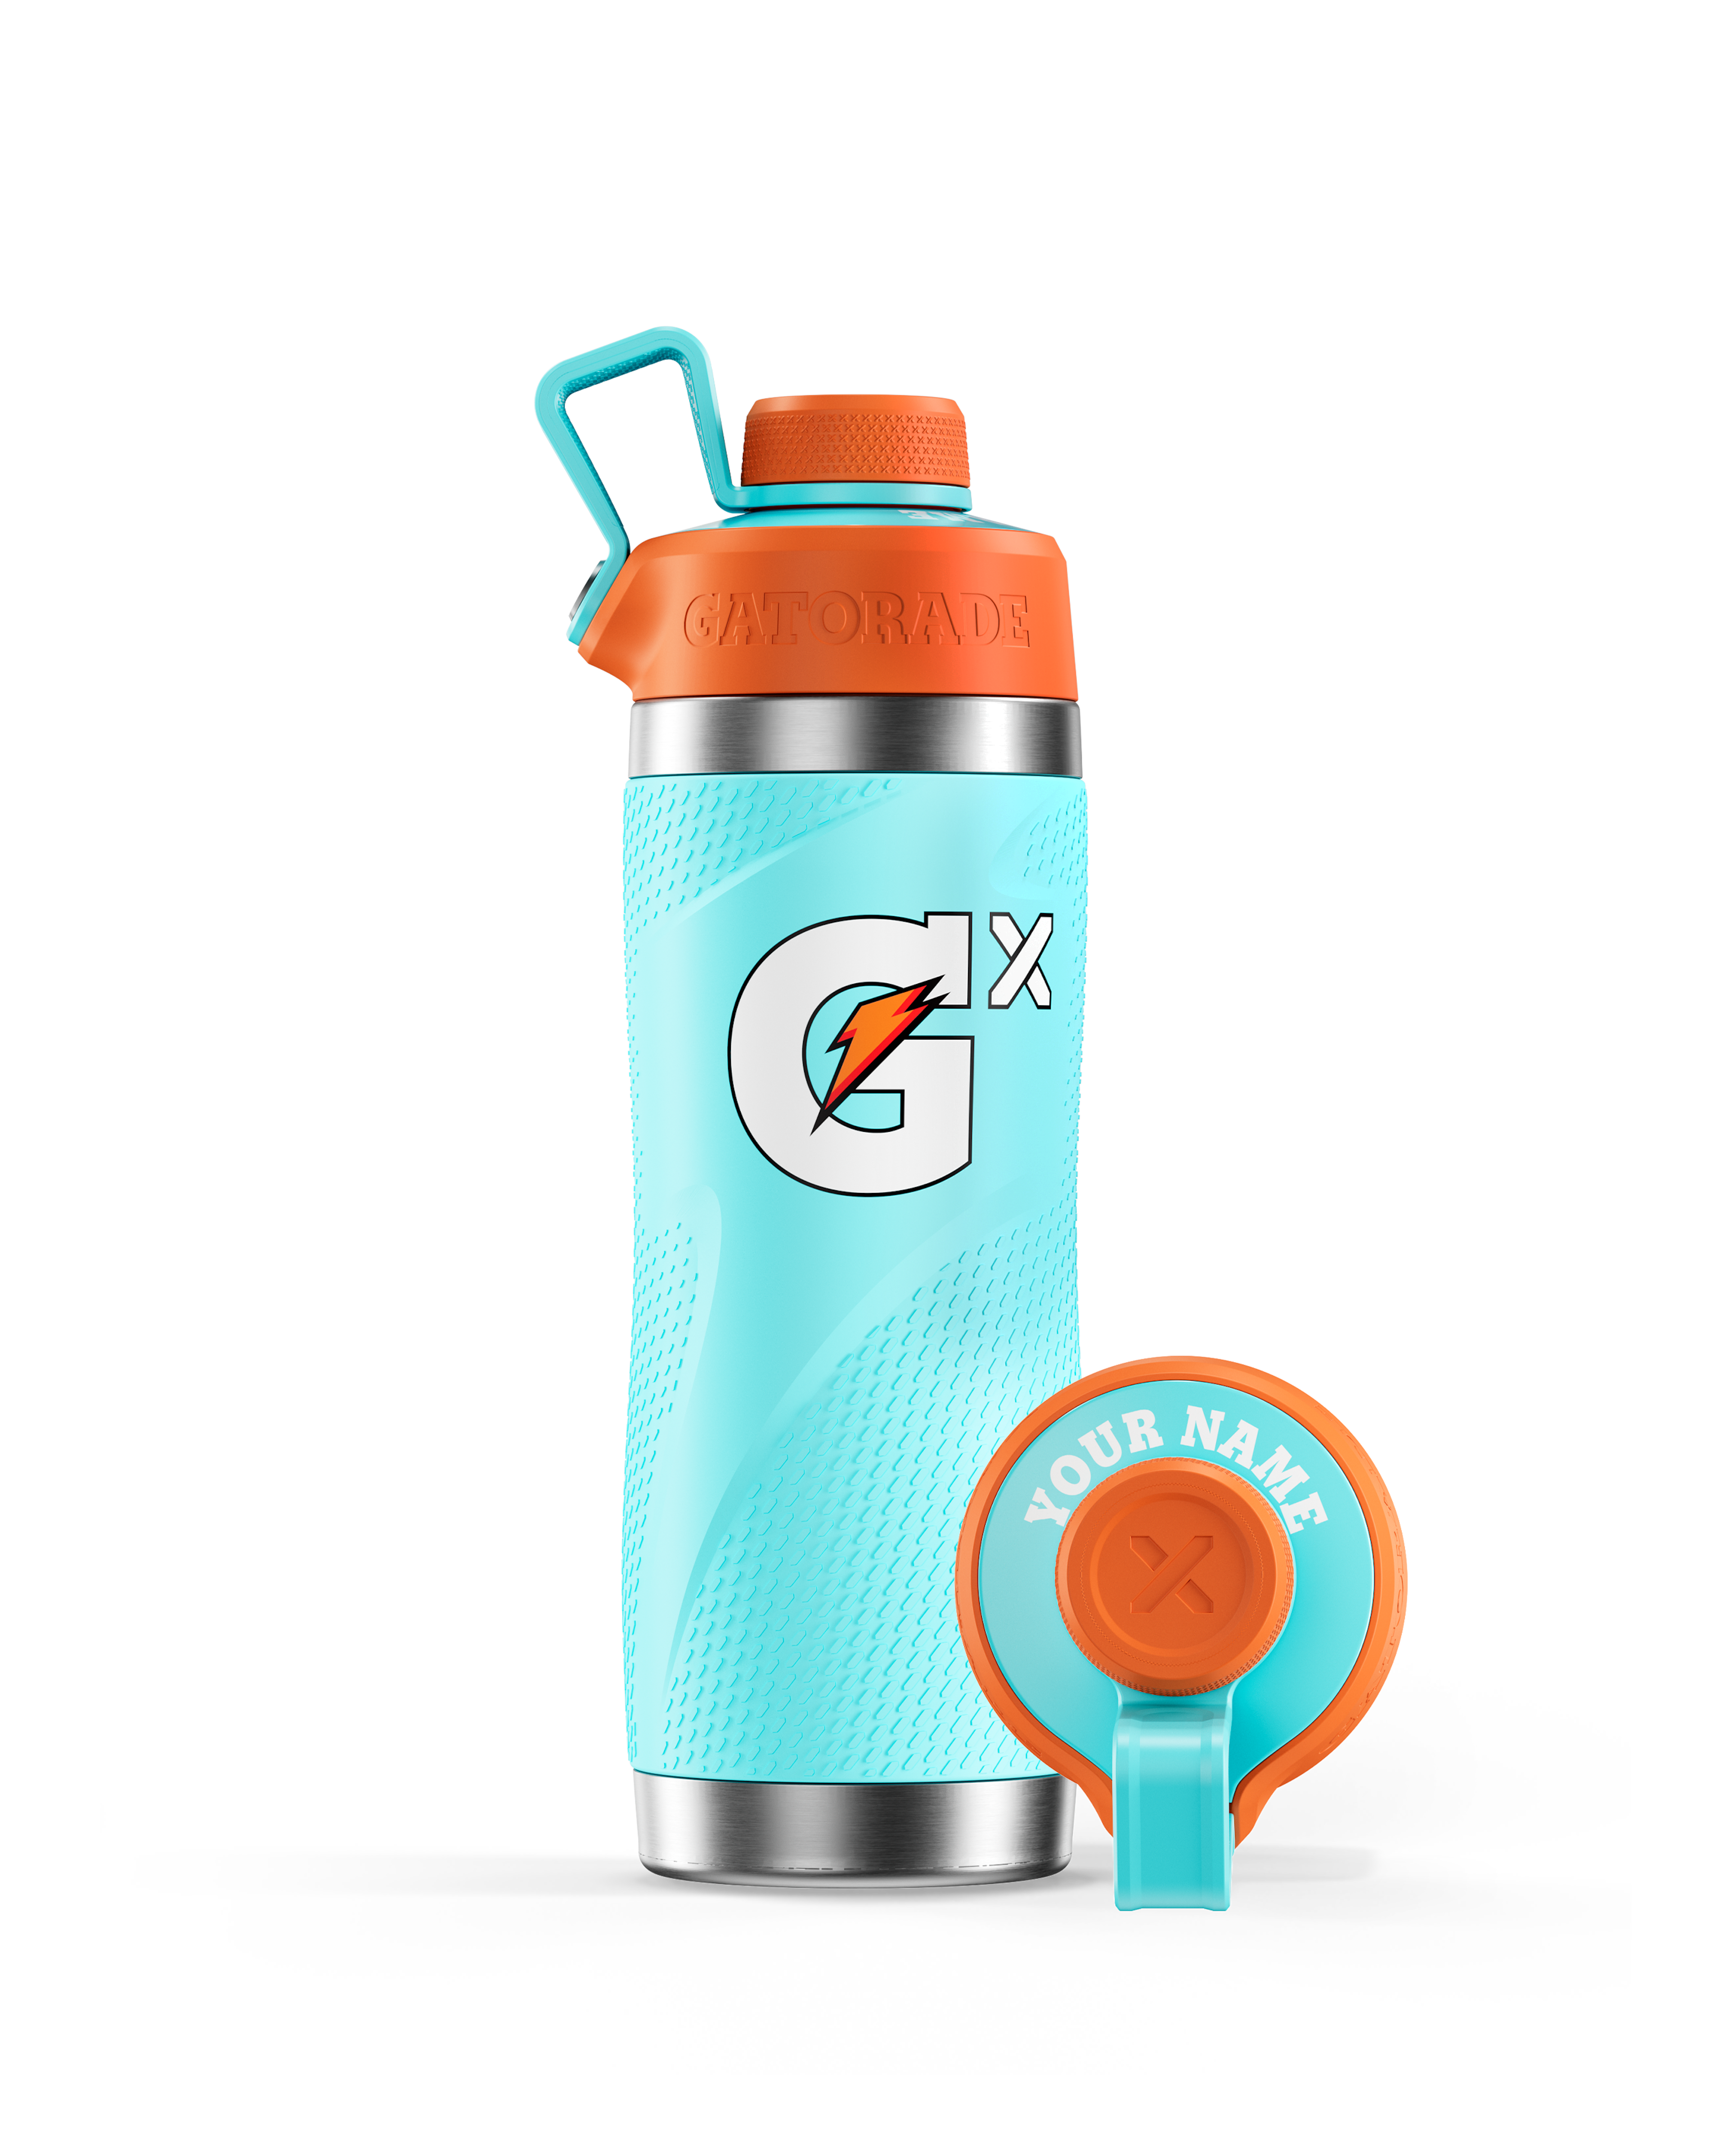 https://www.datocms-assets.com/101859/1697486973-gx-stainless-steel-bottles_neon-blue_product-tile_2680x3344.png?auto=format&fit=max&w=3840